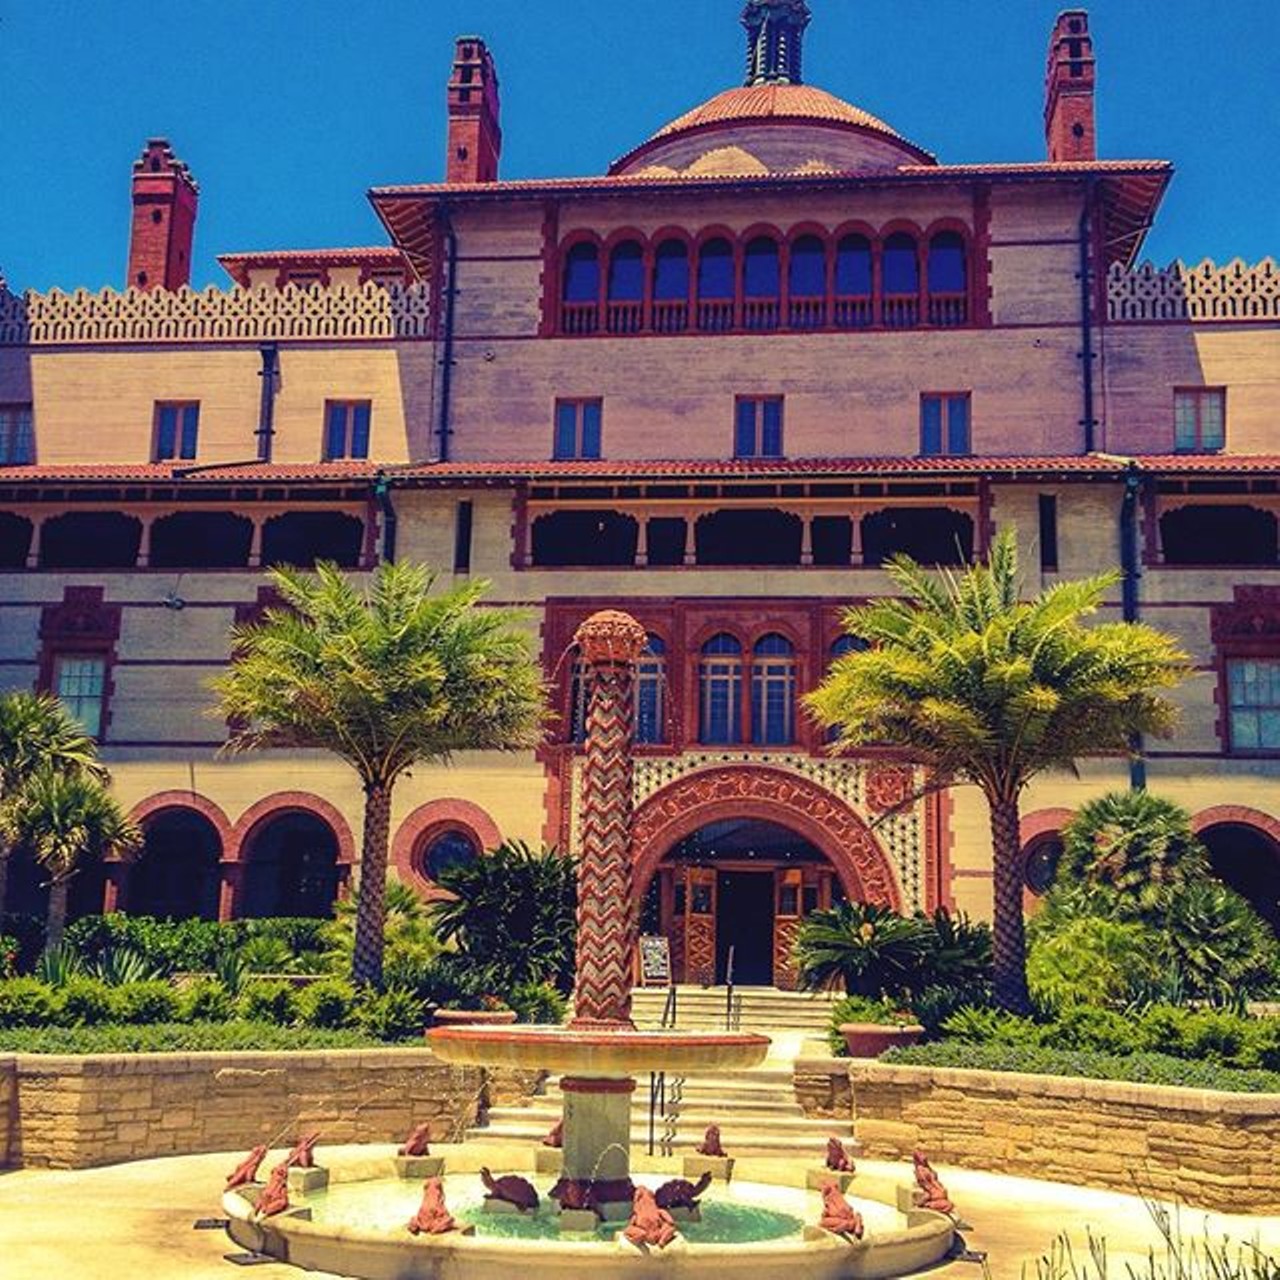 Hotel Ponce De Leon
74 King St, St Augustine
Distance from Orlando: 1 hour and 49 minutes
Built in 1887-88 for Henry Flagler, this hotel was the first large scale building constructed entirely of poured concrete. It is now a part of Flagler College.
Photo via finniganbell9/Instagram